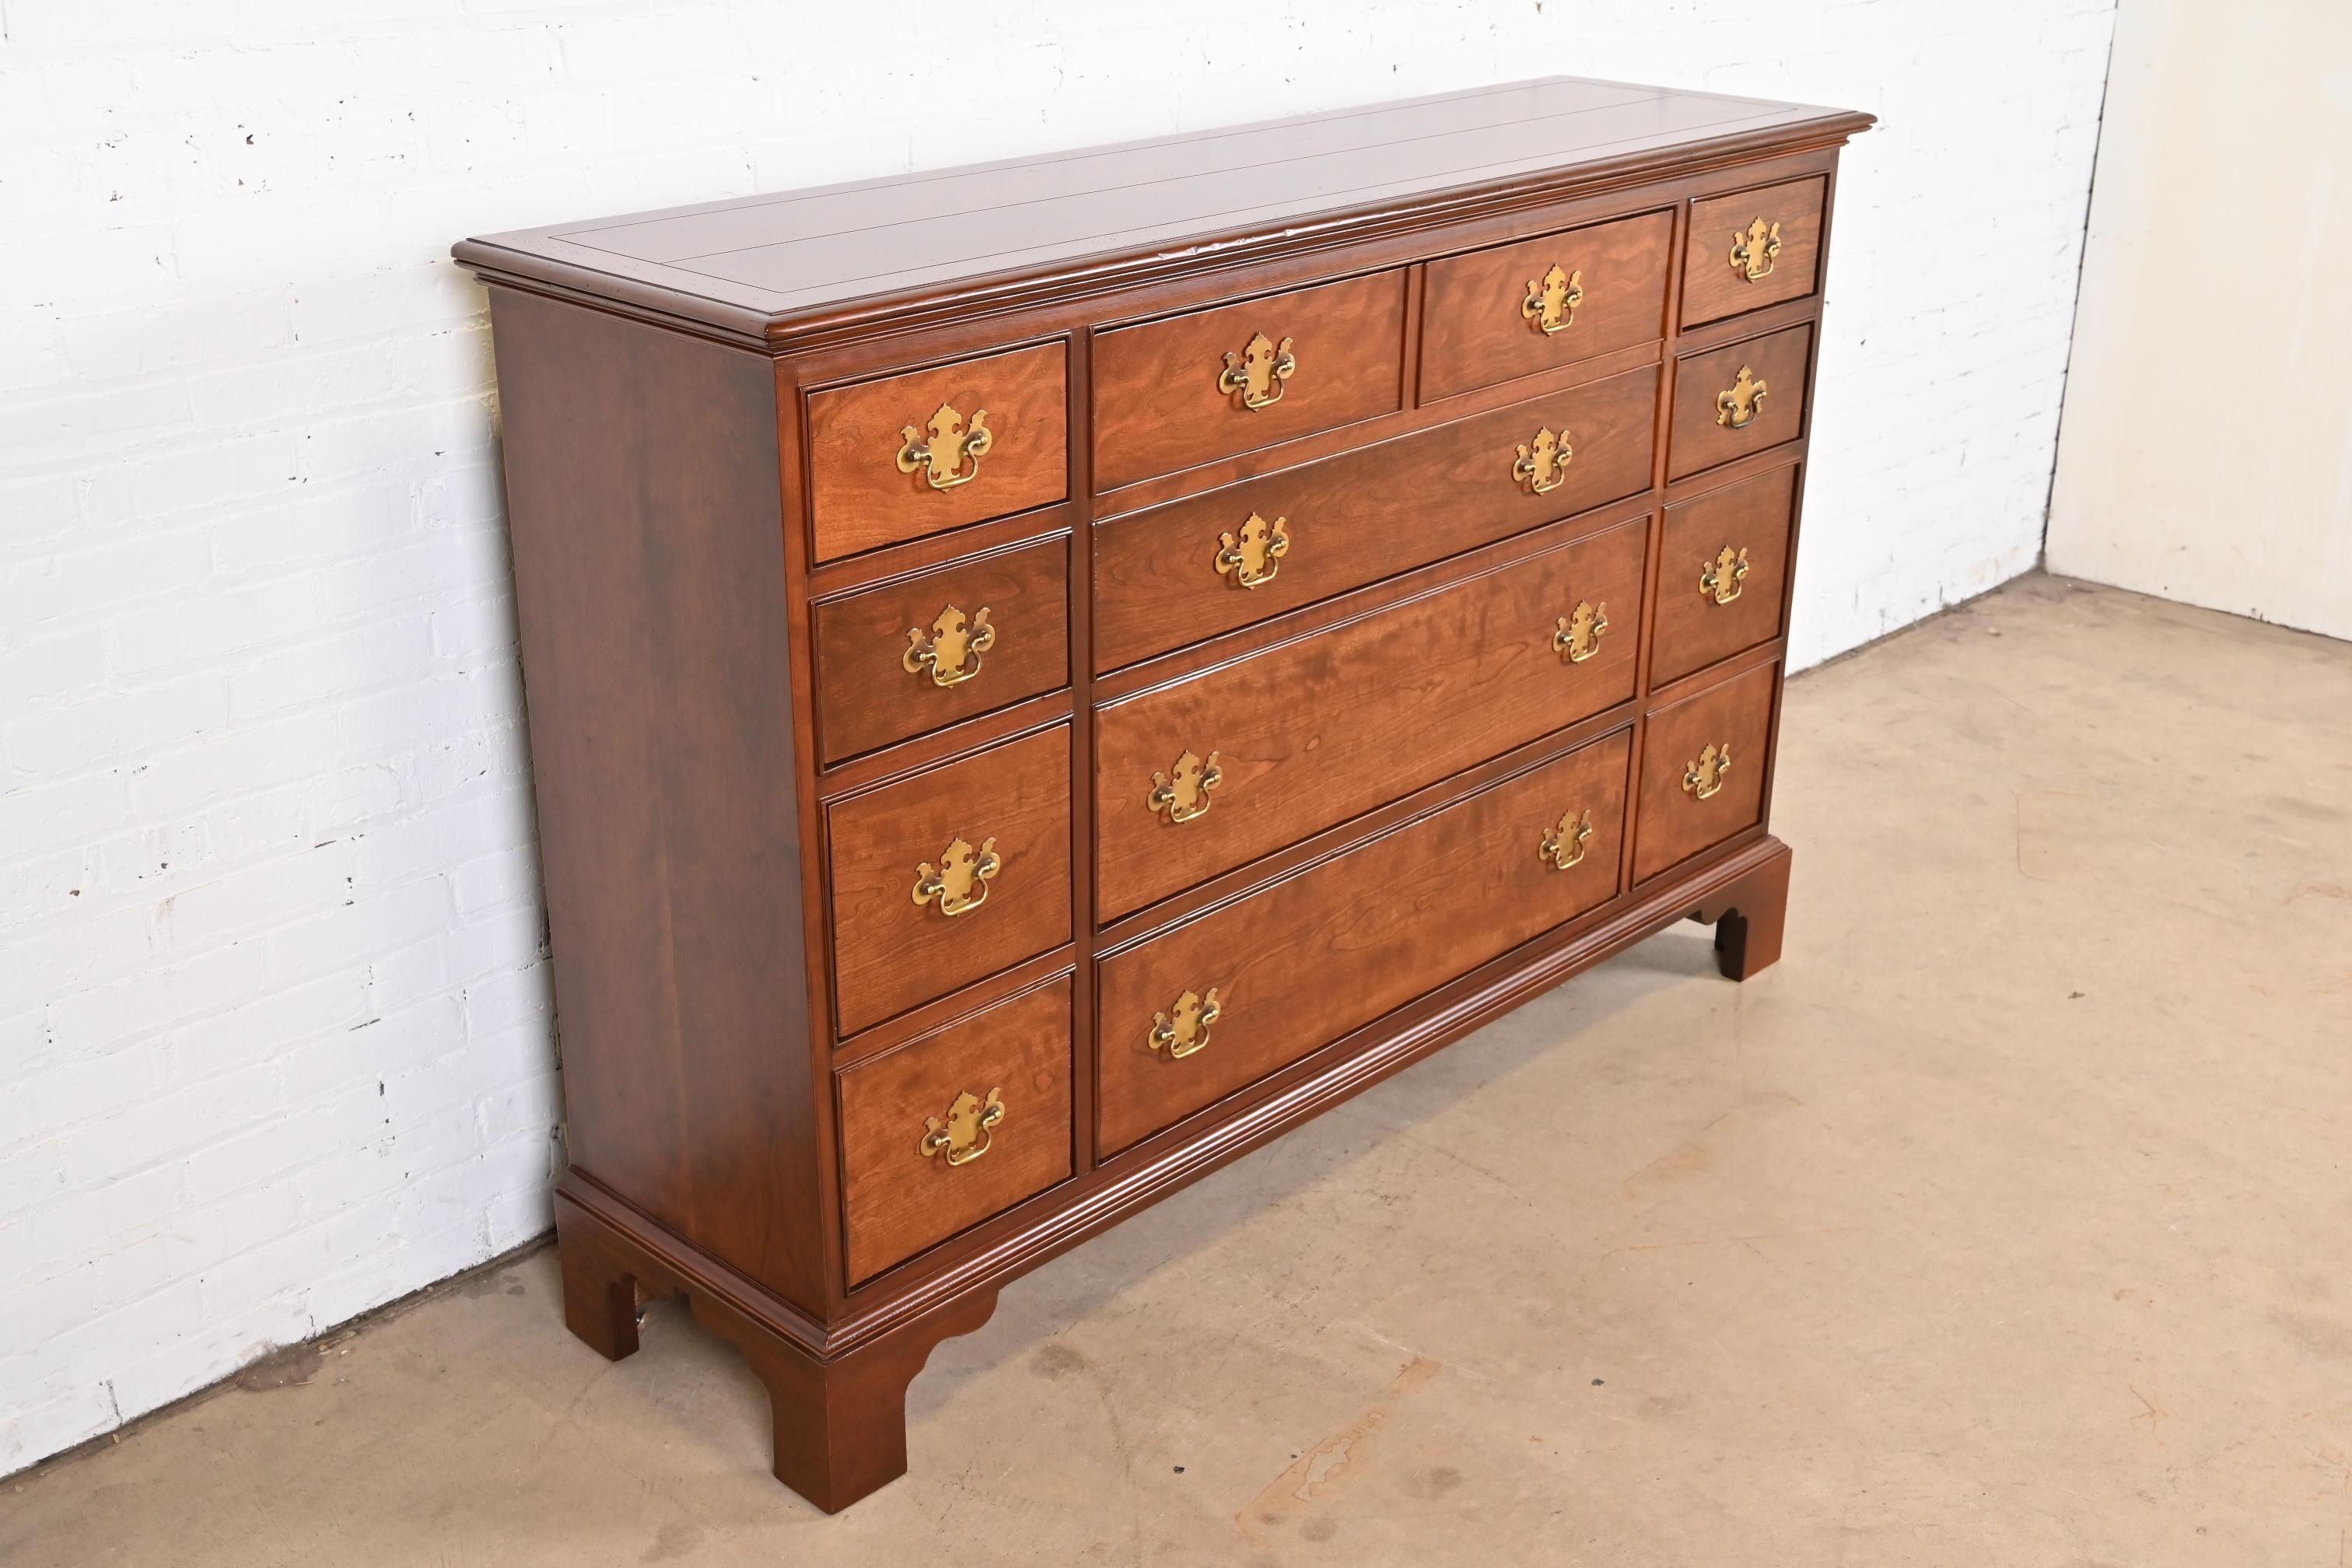 Baker Furniture Georgian Cherry Chest of Drawers with Secretary Desk, Refinished 1